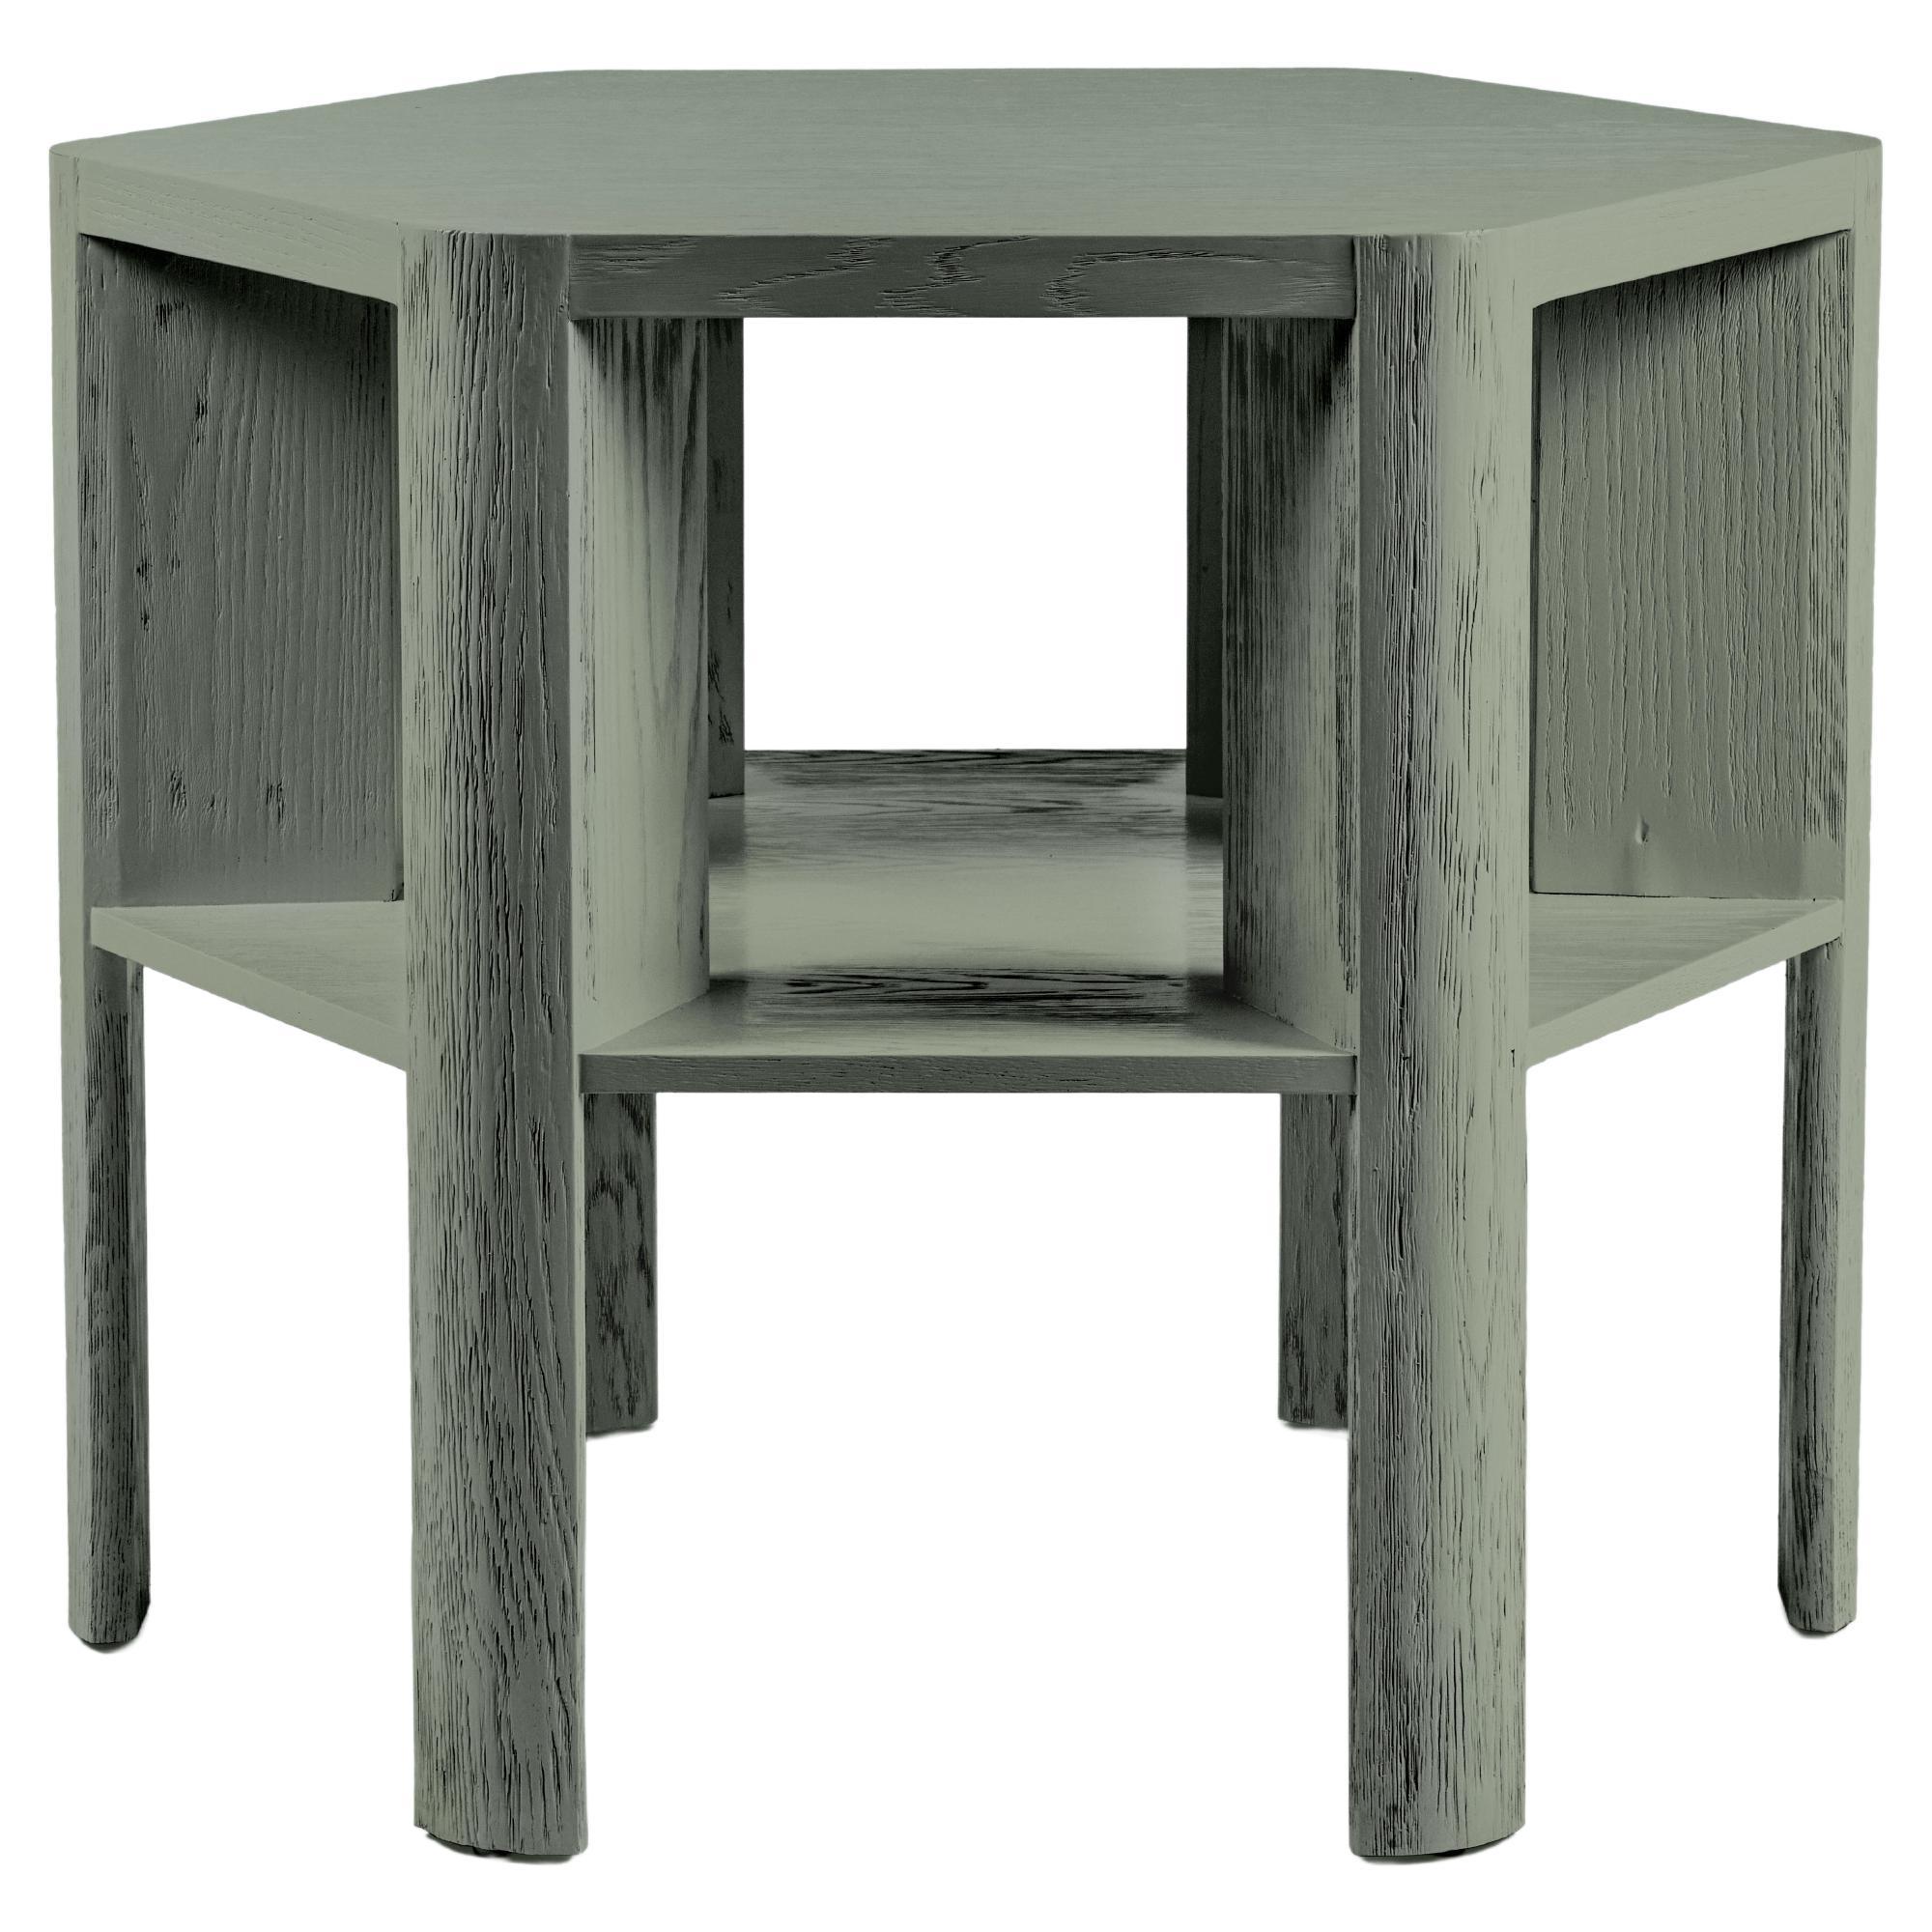 Minimalist Modern Lacquered Library Table Shown in Lichen on Oak For Sale